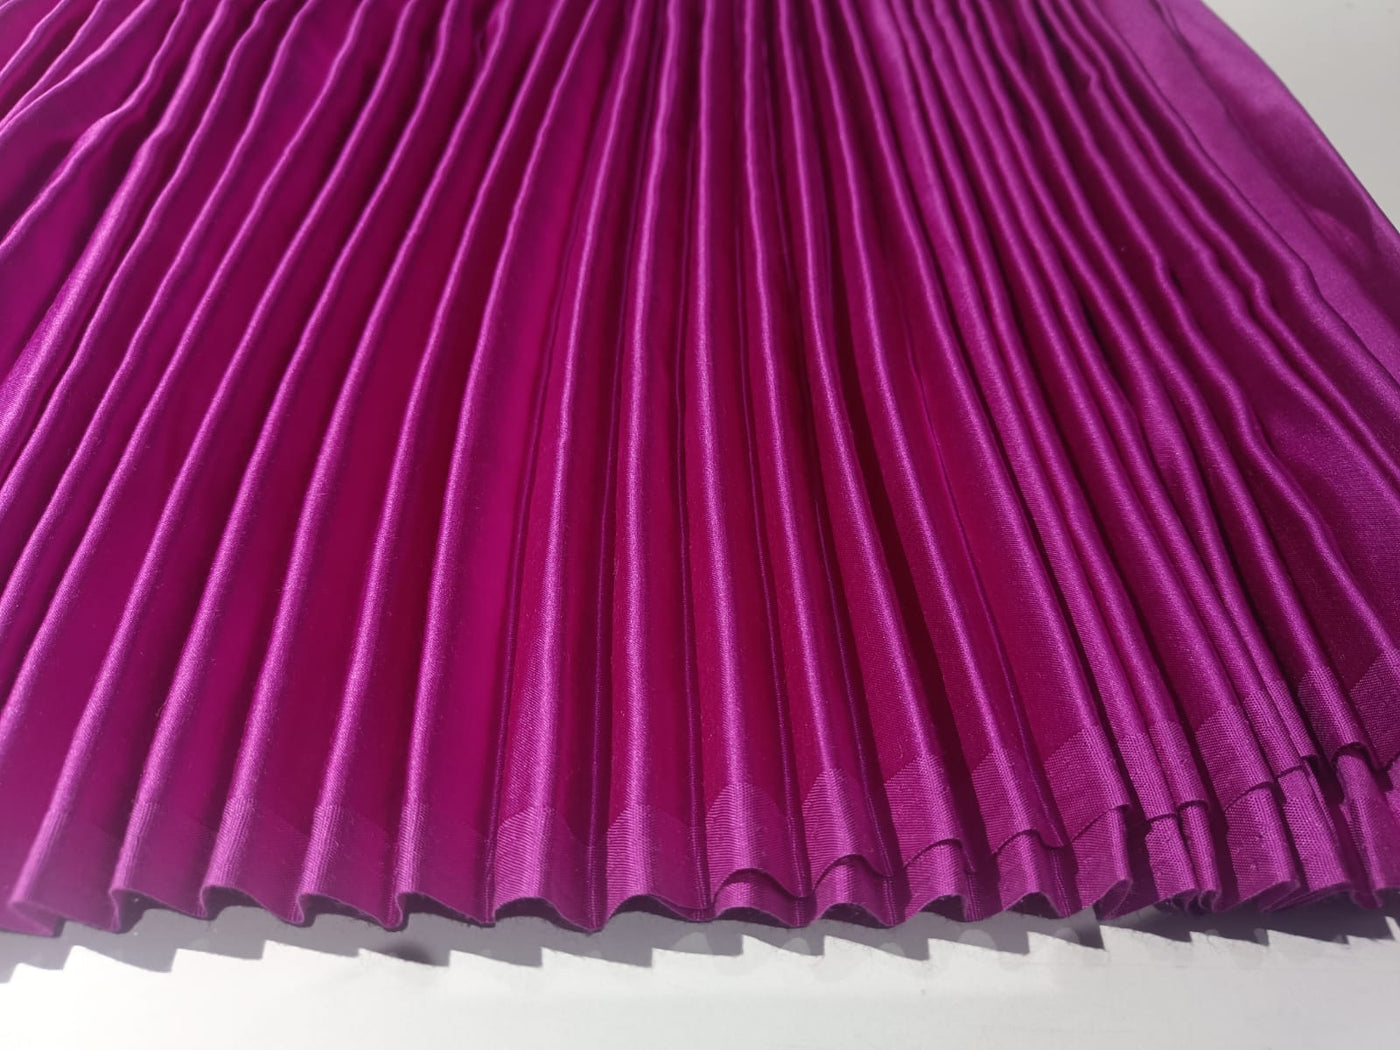 Viscose modal satin weave Pleated fabric 44" wide available in your custom color[12568]